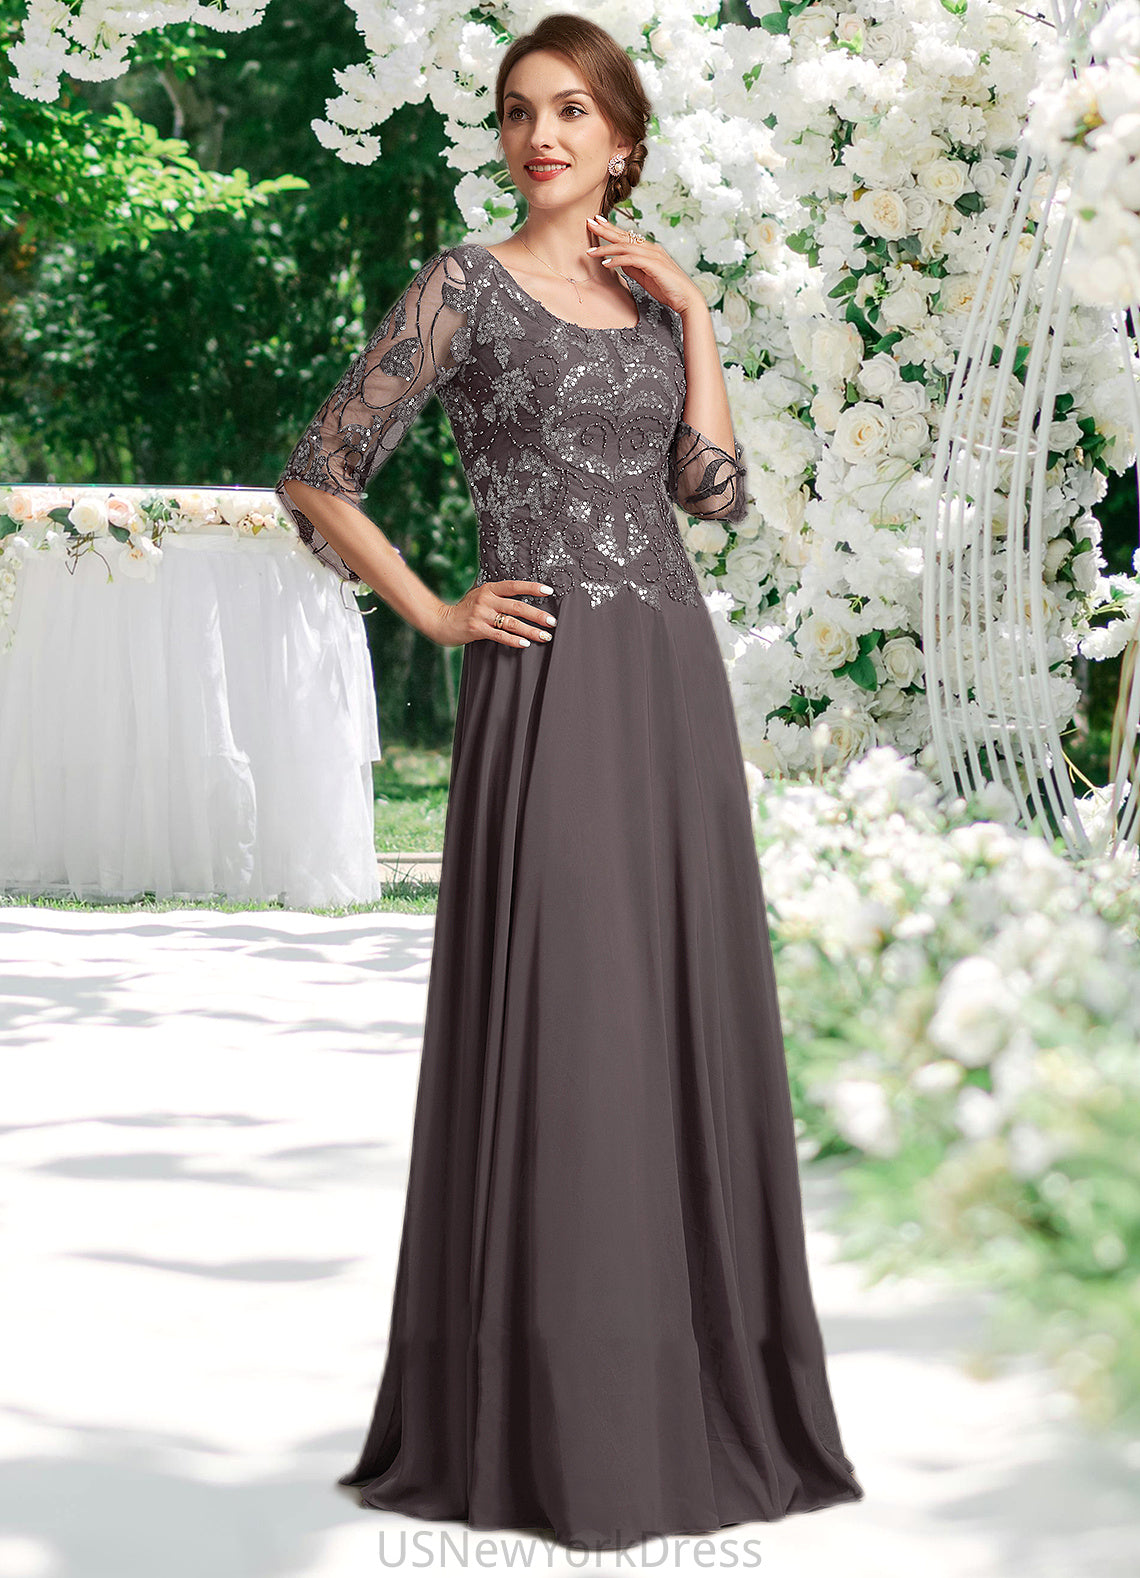 Jaycee A-Line Scoop Neck Floor-Length Chiffon Lace Mother of the Bride Dress With Beading Sequins DJ126P0015036